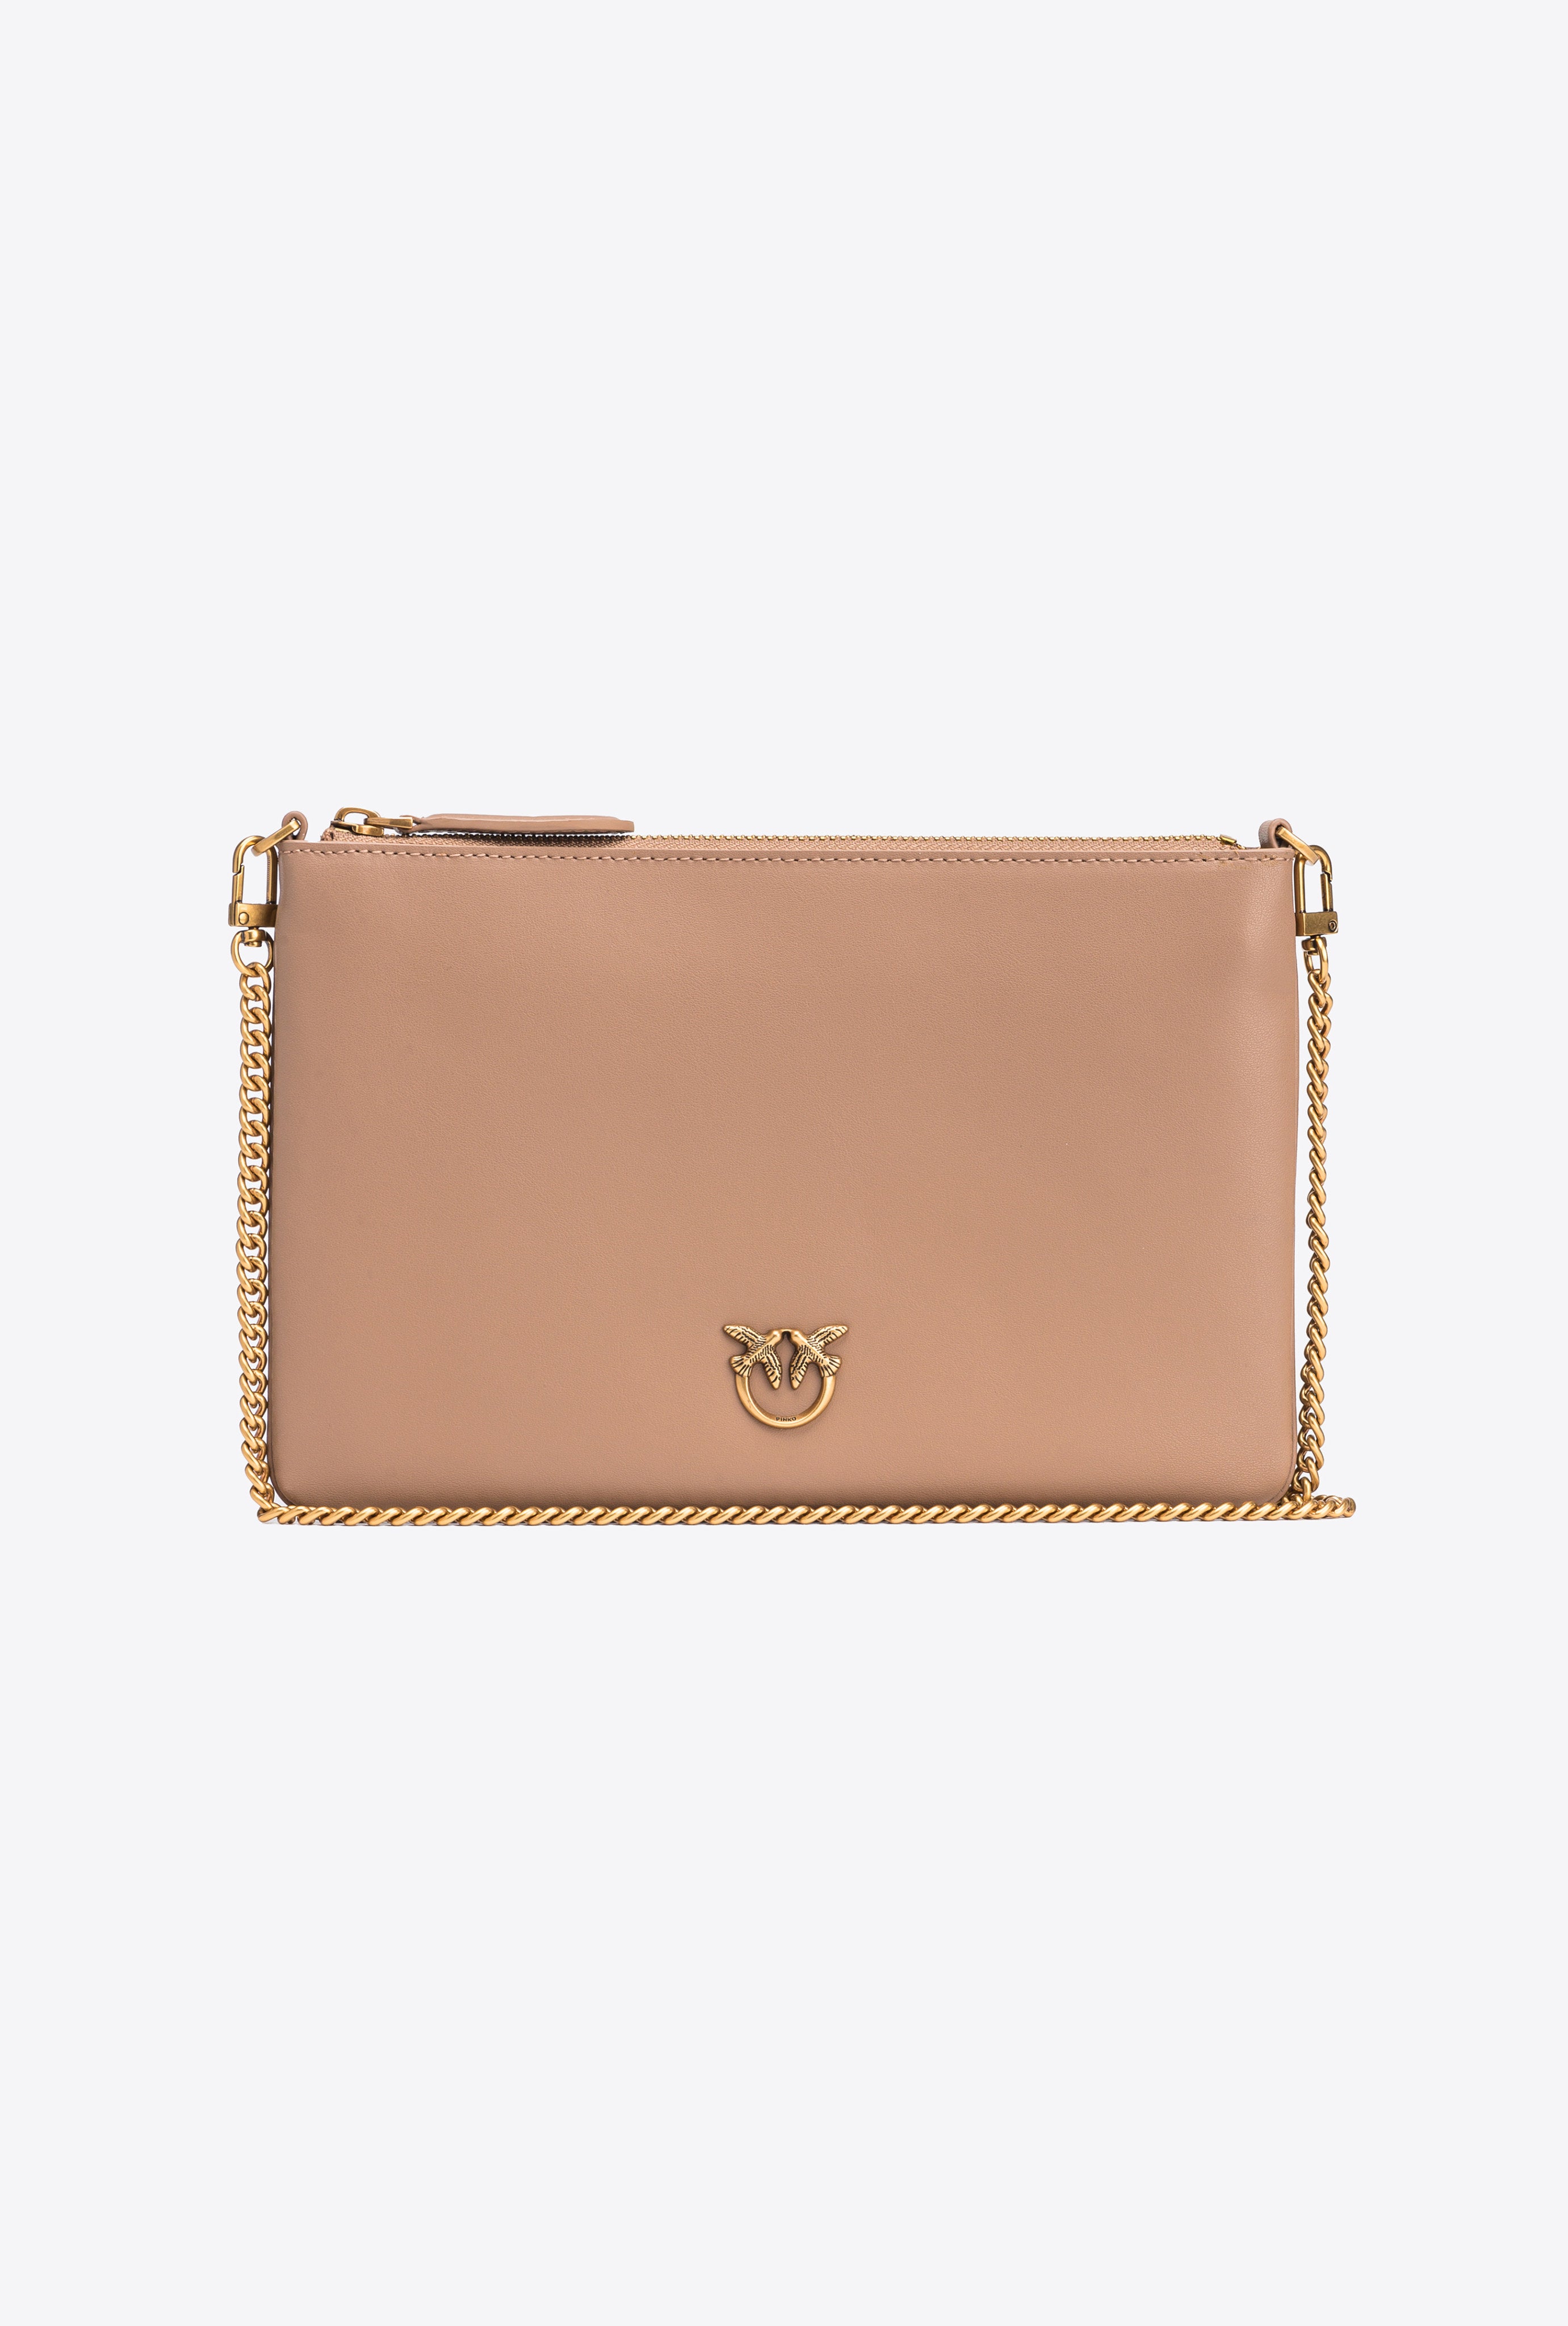 PINKO Flat Classic Ginger Biscuit Bag